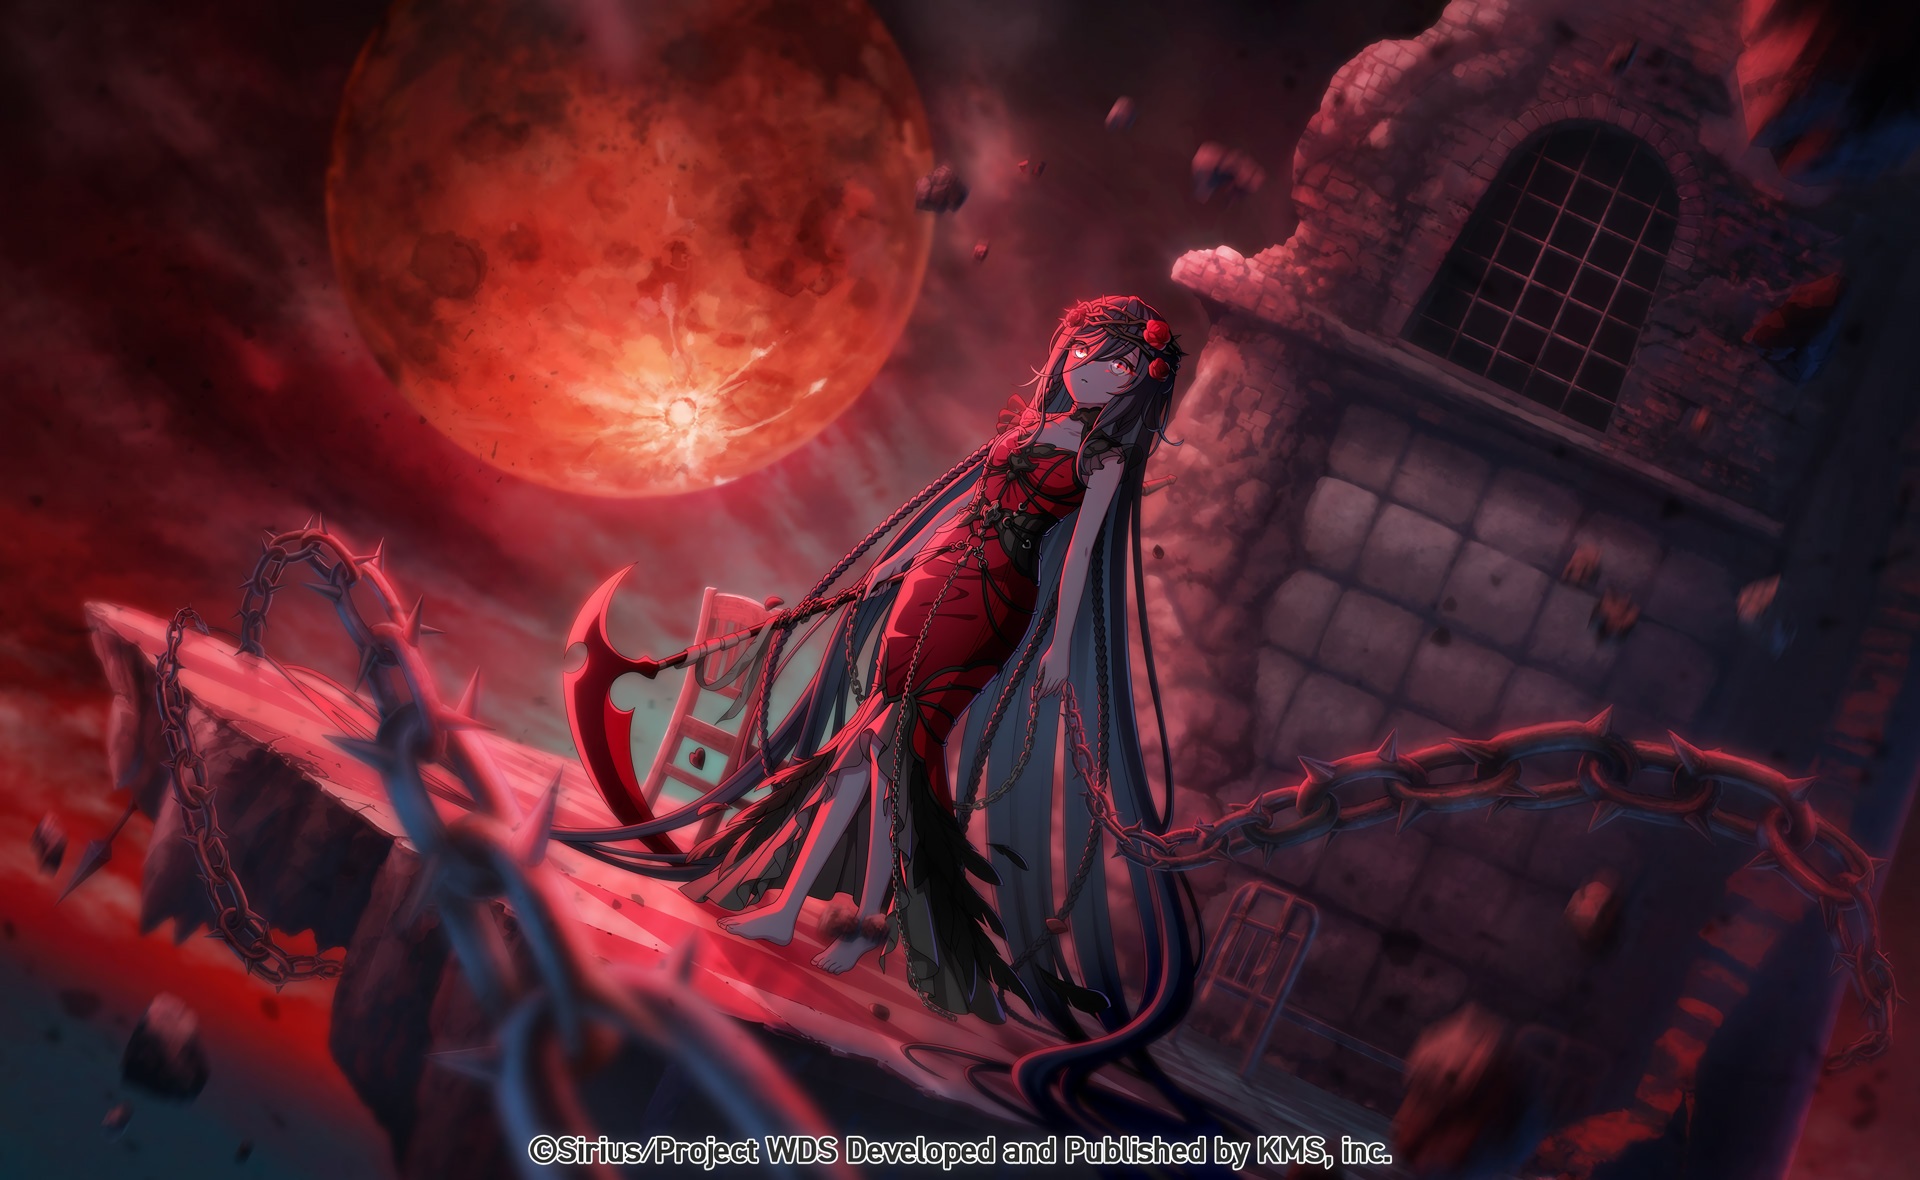 Anime Anime Girls Long Hair Watermarked Red Moon Moon Chains Debris Flower In Hair Dress Looking At  1920x1180